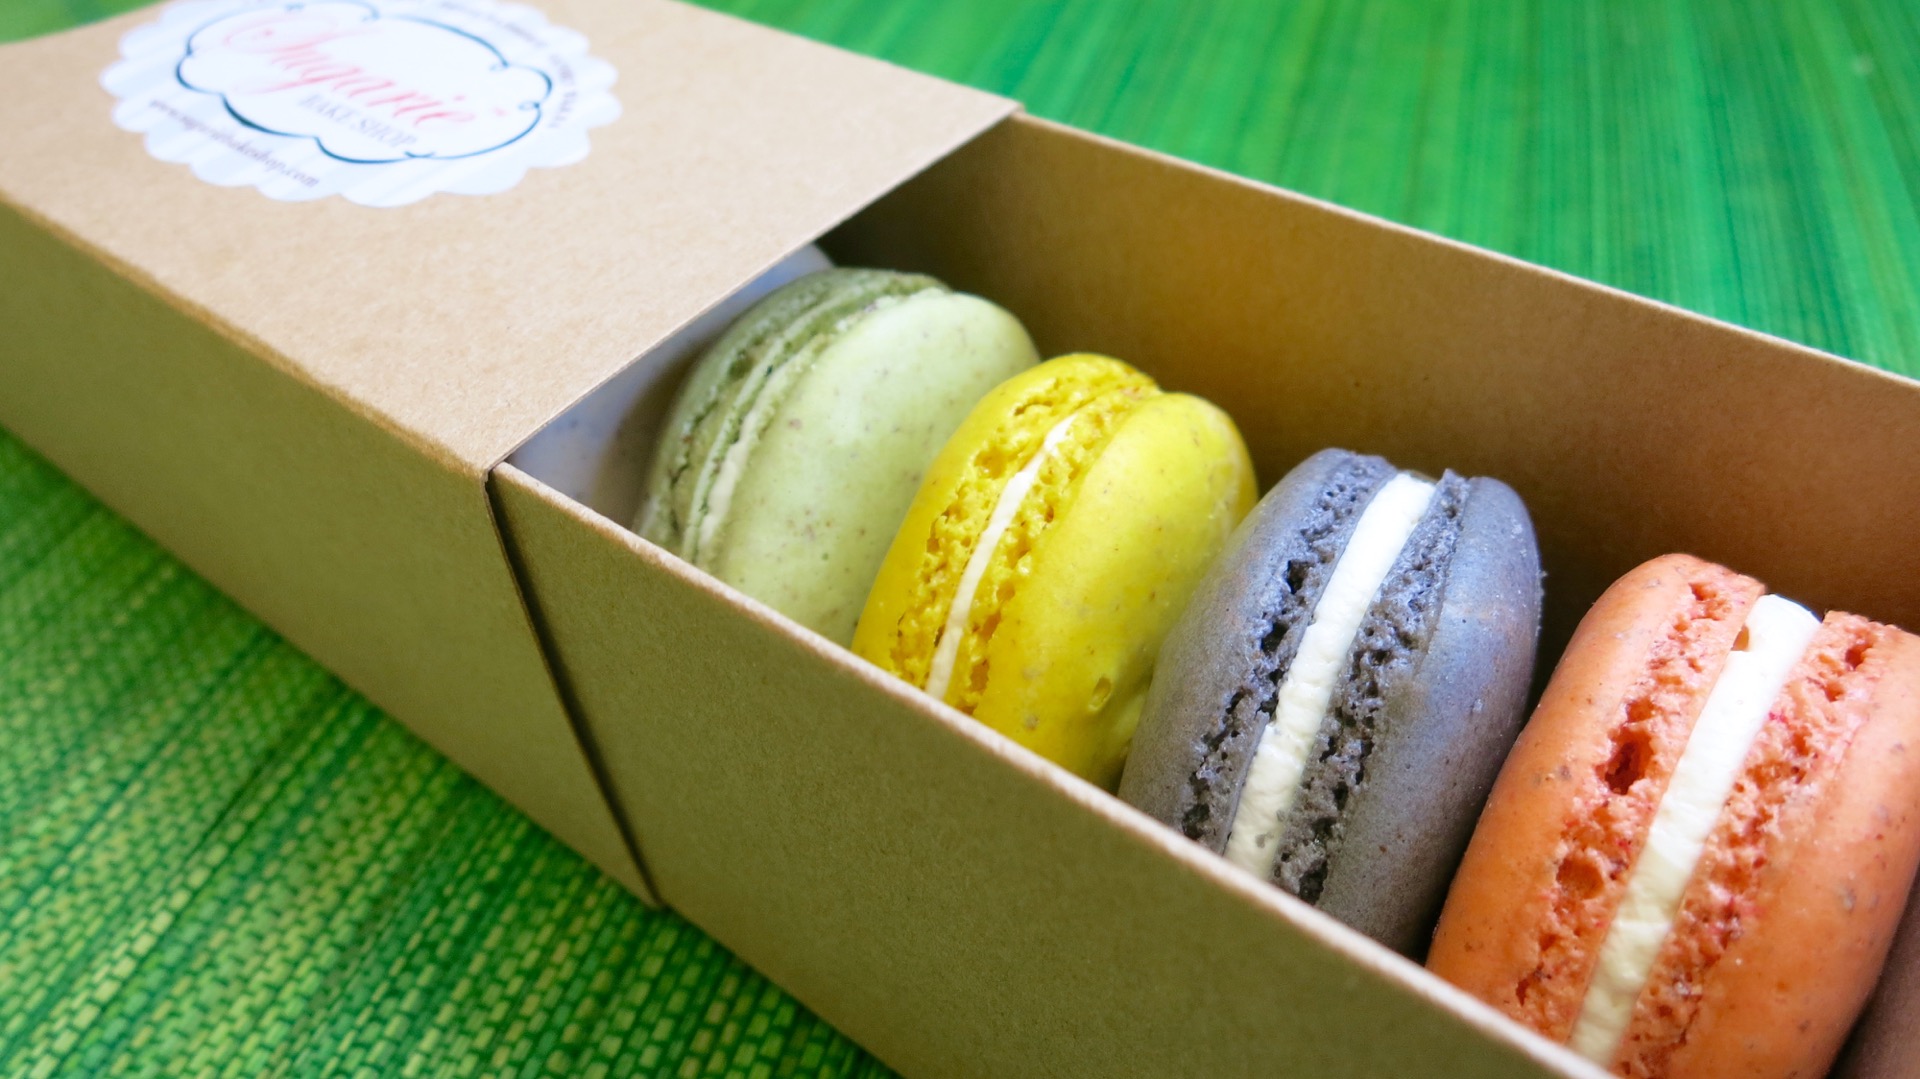 A vivid palette of flavors is available at Sugarie Bakery in Pleasanton.